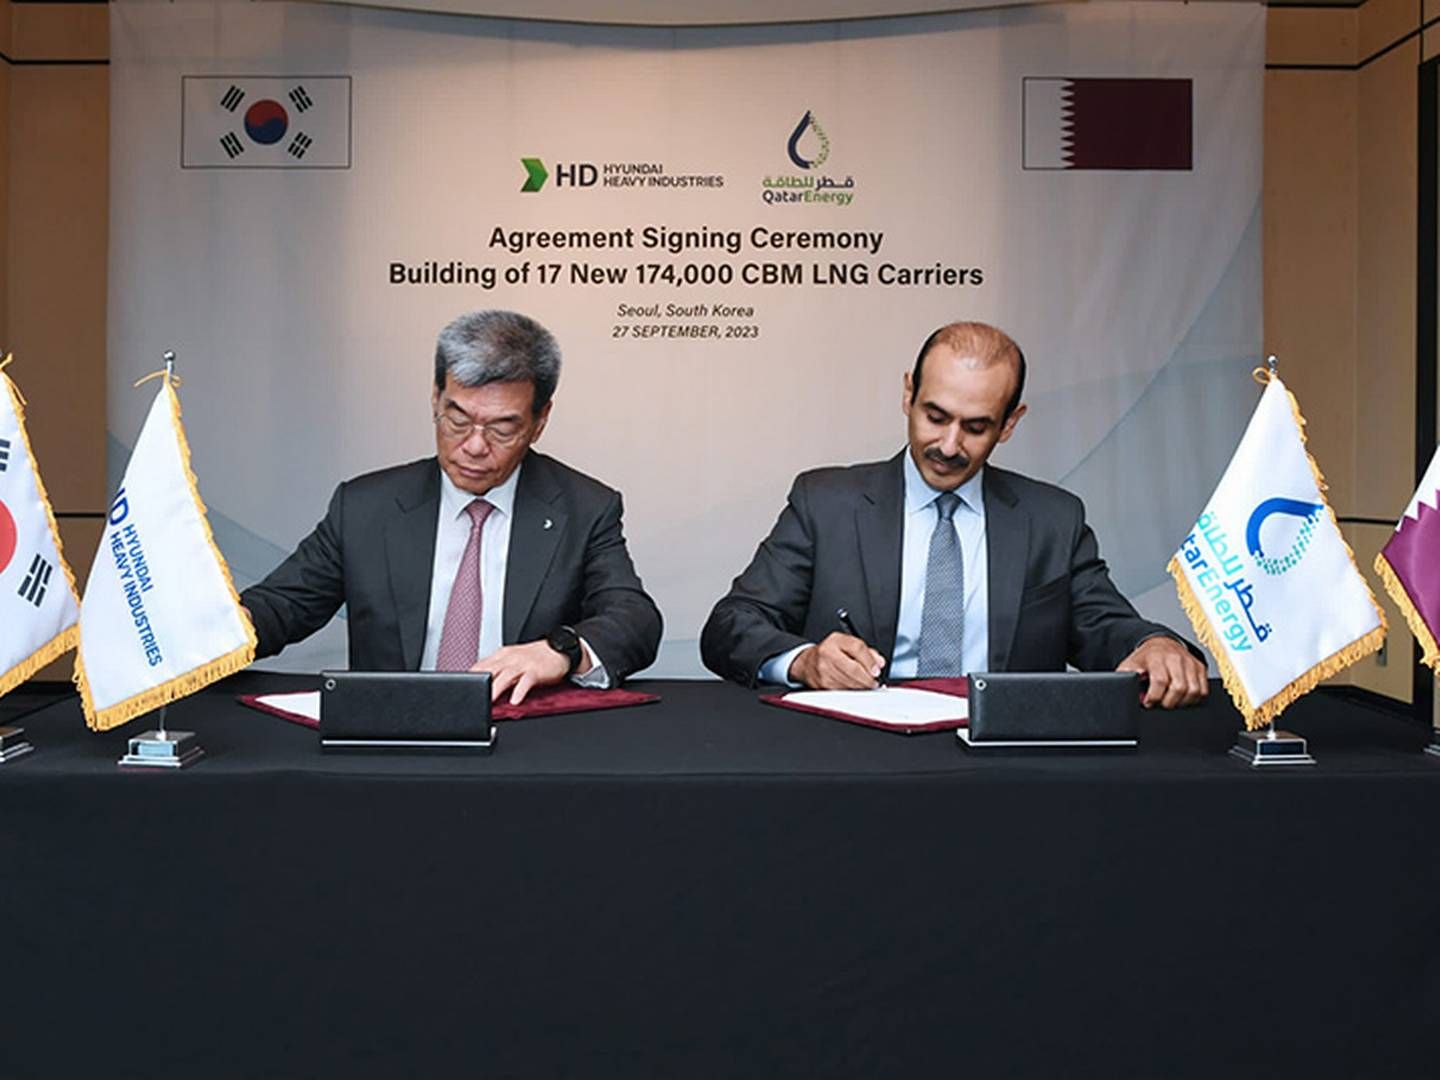 The management of South Korean shipbuilder Samsung Heavy Industries Co. signs a huge order for the delivery of LNG carriers to the Middle East on an earlier occasion. | Photo: Qatarenergy